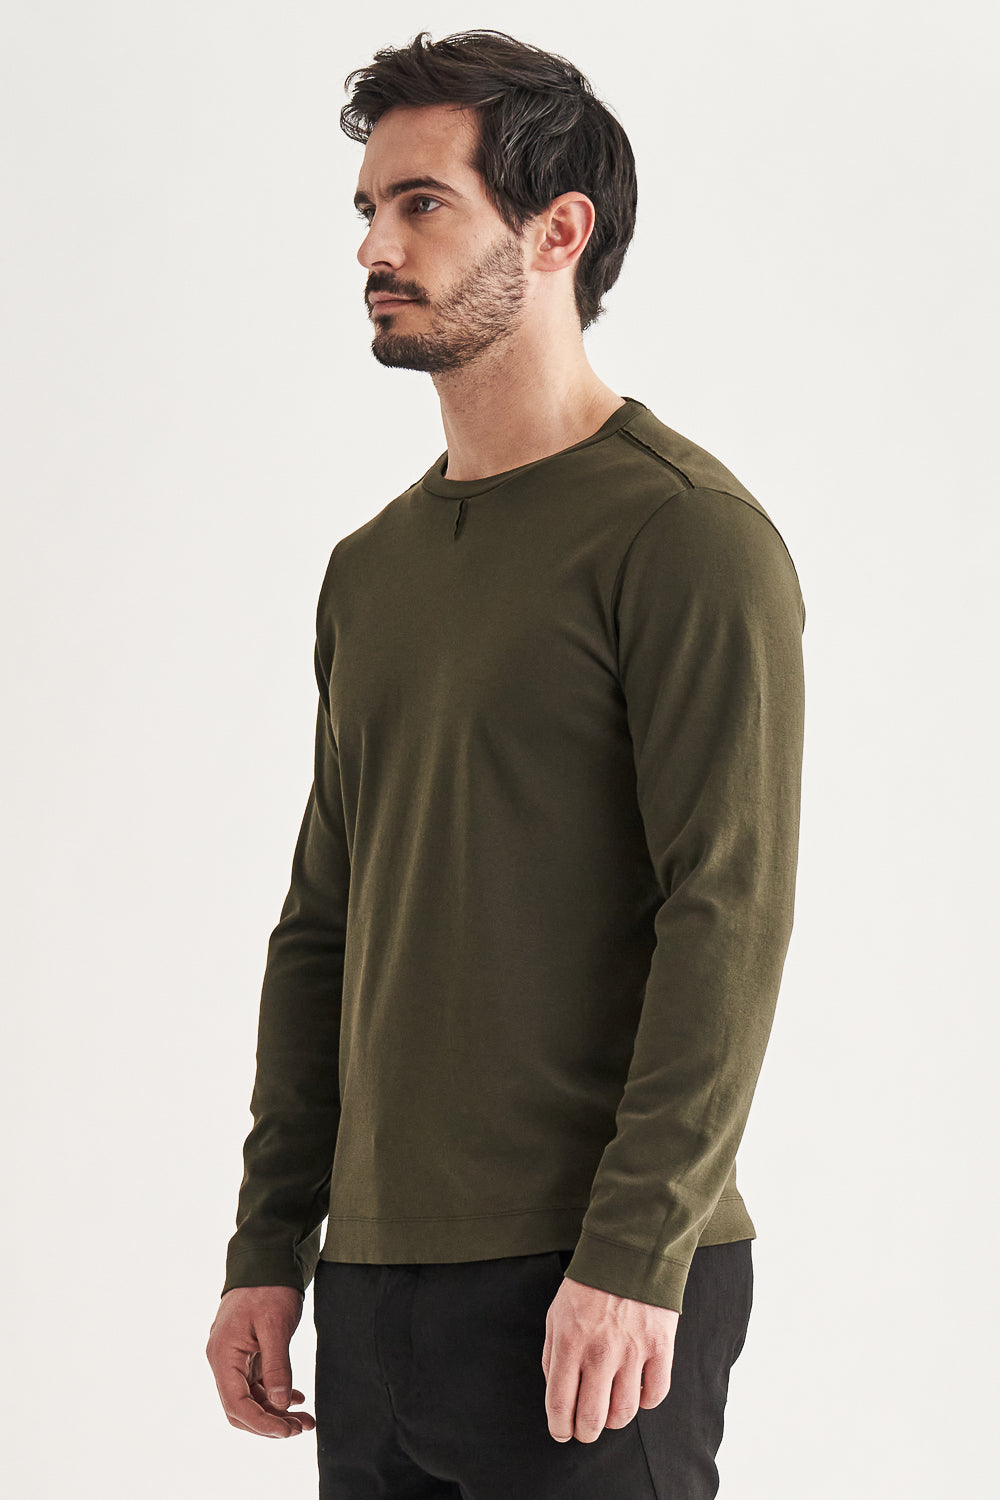 Buy the Transit Raw Cut Details Cotton T-Shirt in Khaki at Intro. Spend £50 for free UK delivery. Official stockists. We ship worldwide.